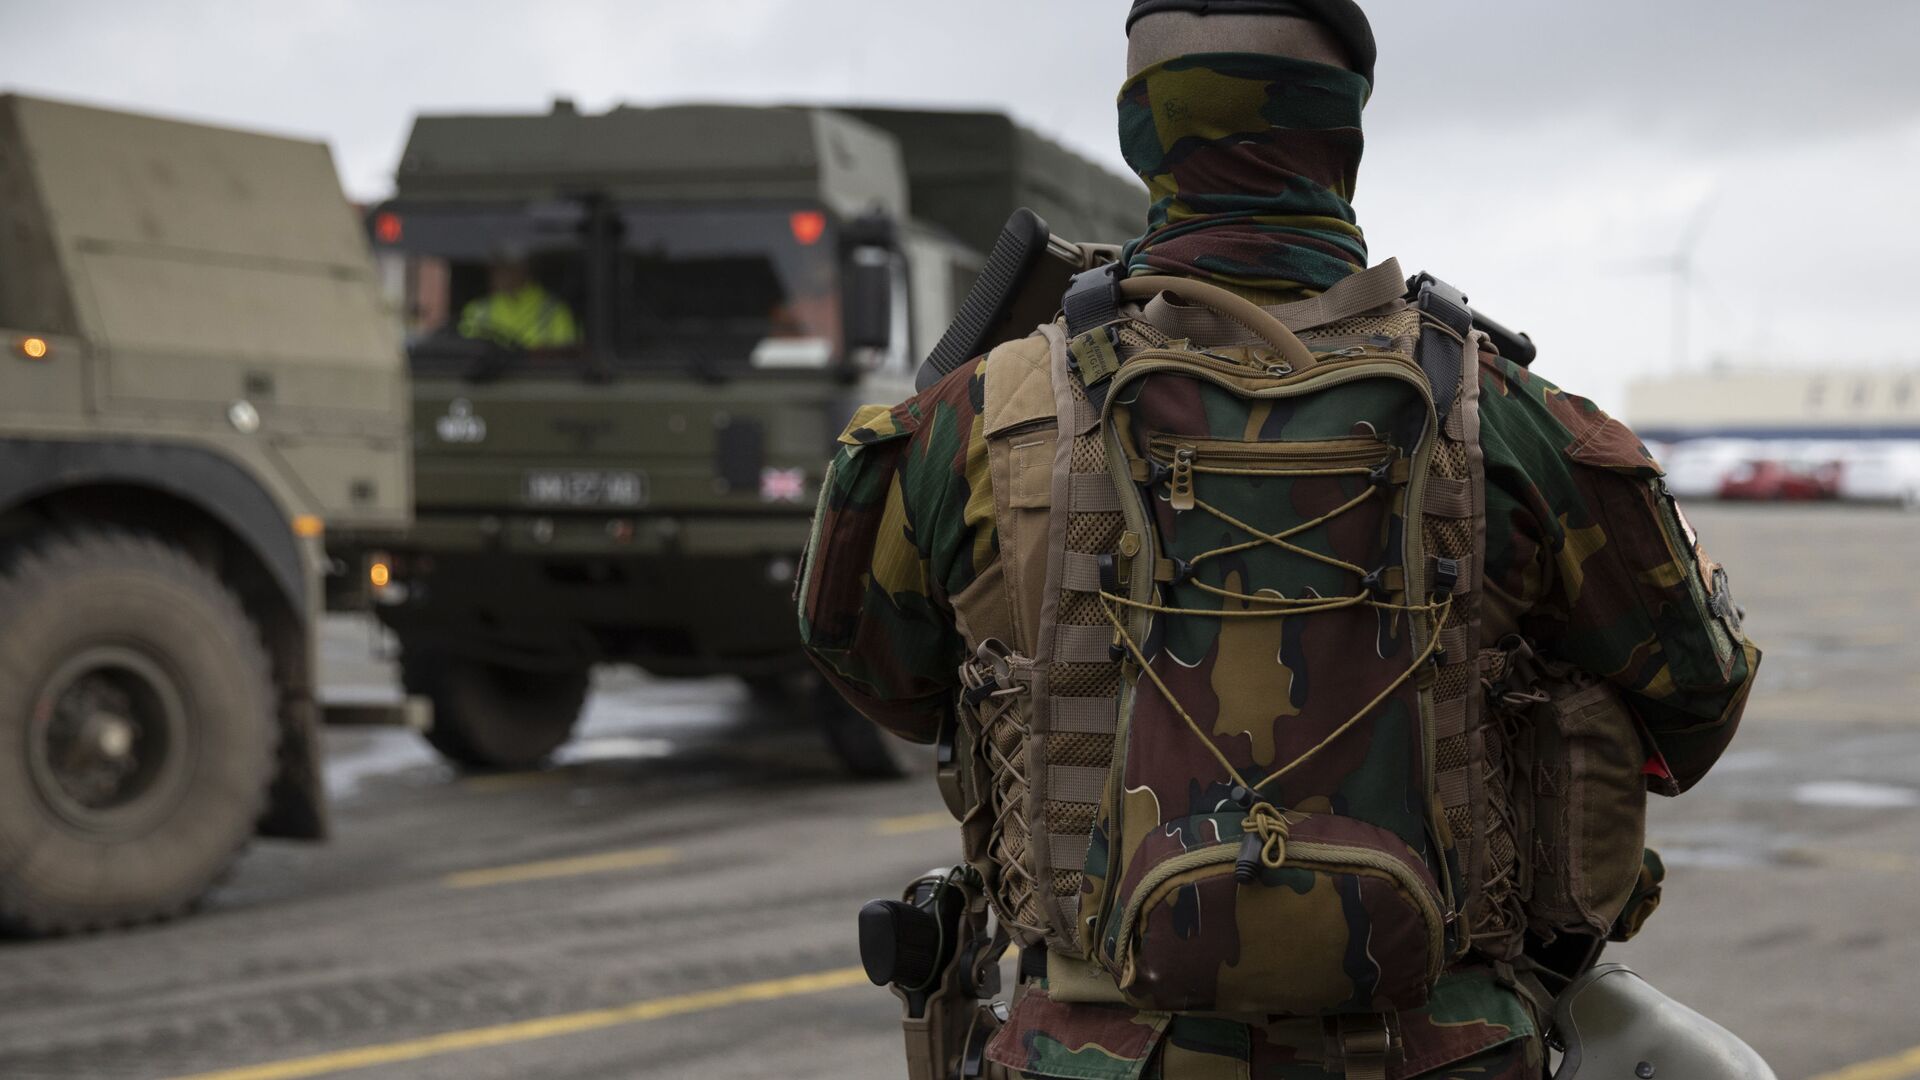 A Belgian solider patrols in a temporary military zone as vehicles arrive from a British naval vessel, taking part in U.S.-led war games, at the Port of Antwerp in Antwerp, Belgium, Monday Feb. 3, 2020. The Defender-Europe 2020 exercises will involve approximately 20,000 American troops; the biggest deployment of U.S.-based soldiers to Europe in 25 years. - Sputnik International, 1920, 05.01.2022